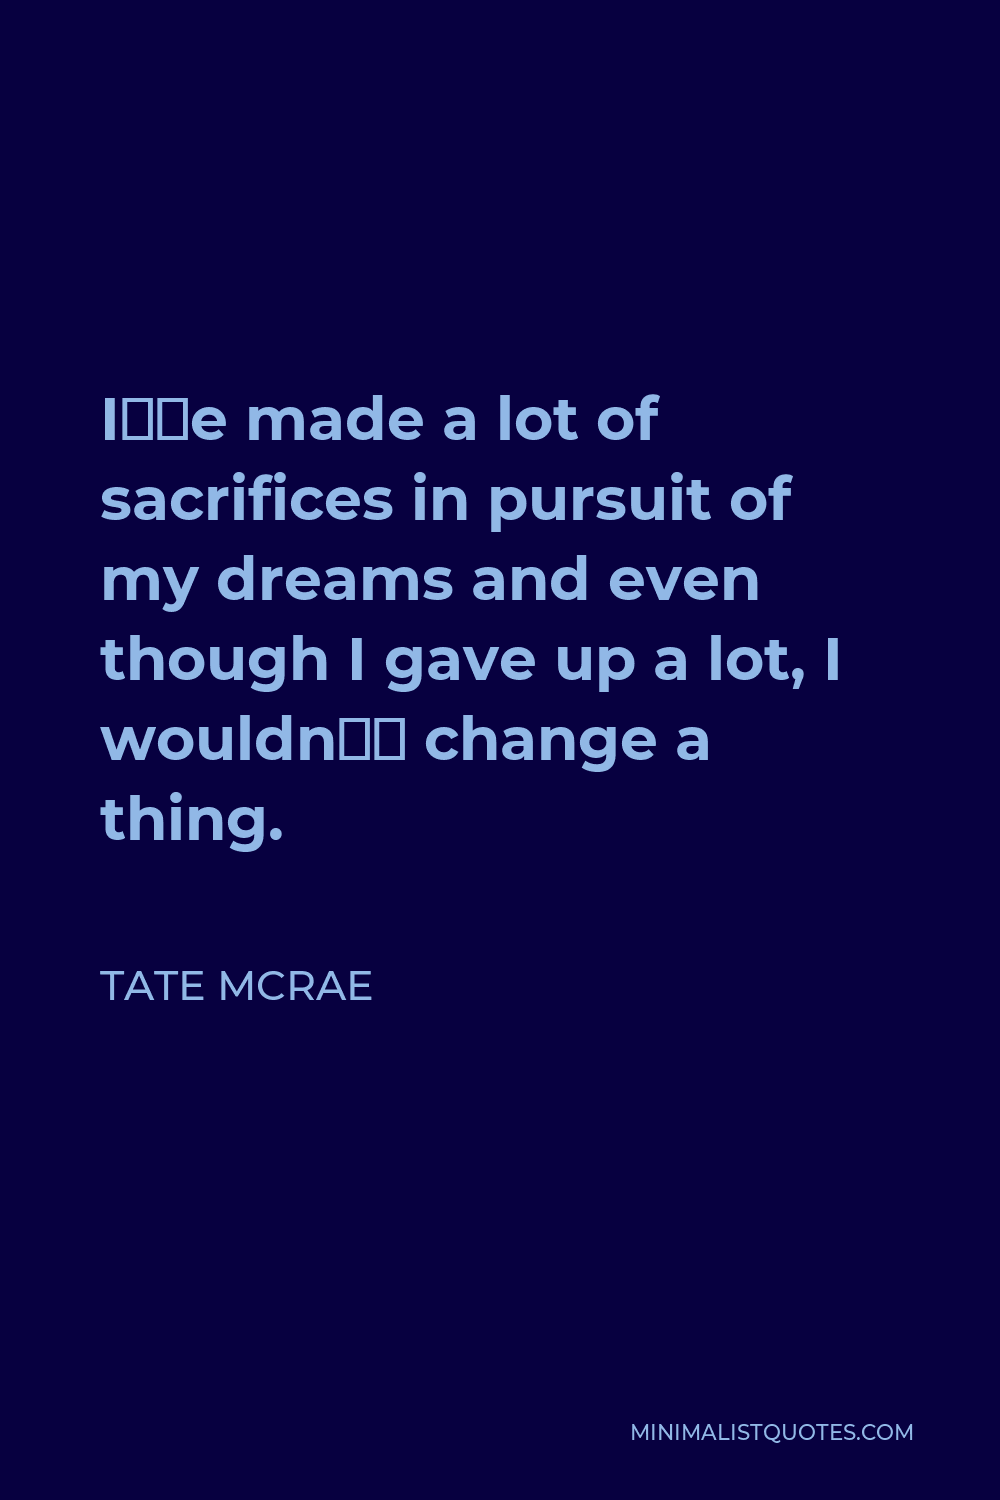 Tate McRae Quote - I’ve made a lot of sacrifices in pursuit of my dreams and even though I gave up a lot, I wouldn’t change a thing.